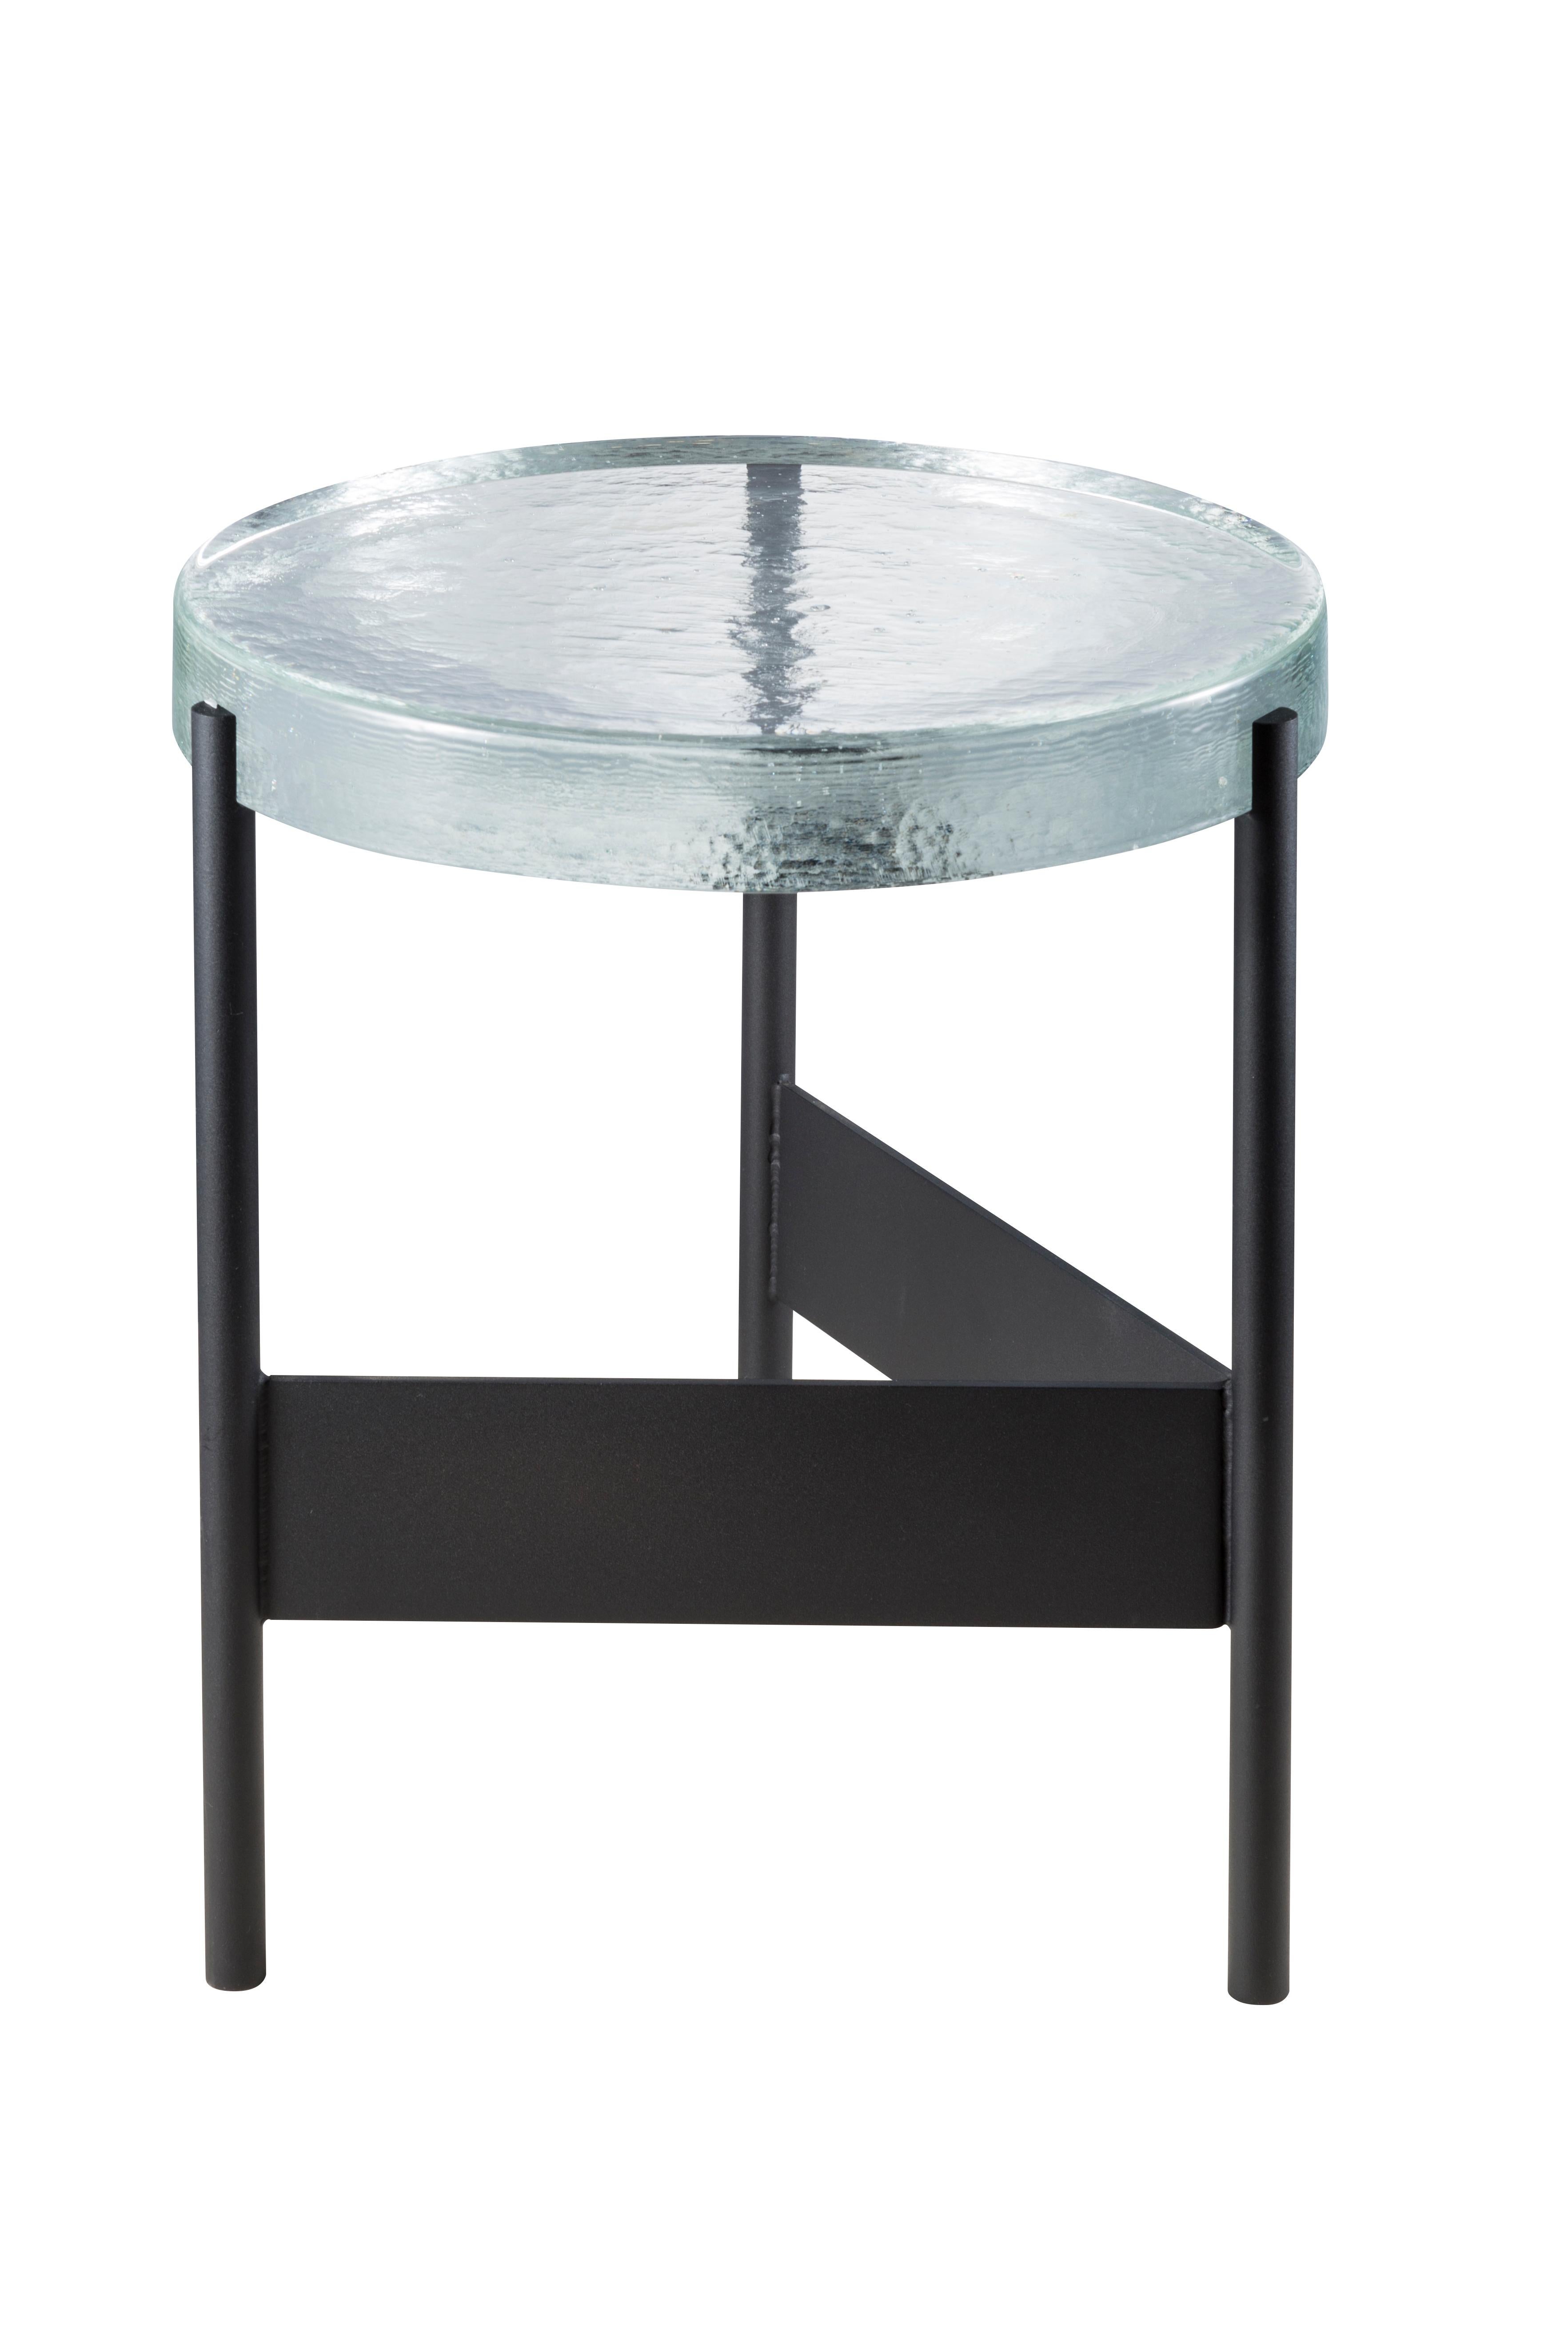 Alwa two transparent black side table by Pulpo
Dimensions: D38 x H44 cm
Materials: casted glass; powder coated steel 

Also available in different finishes.

Normally, glass is regarded as being lightweight with sharp edges. In contrast,